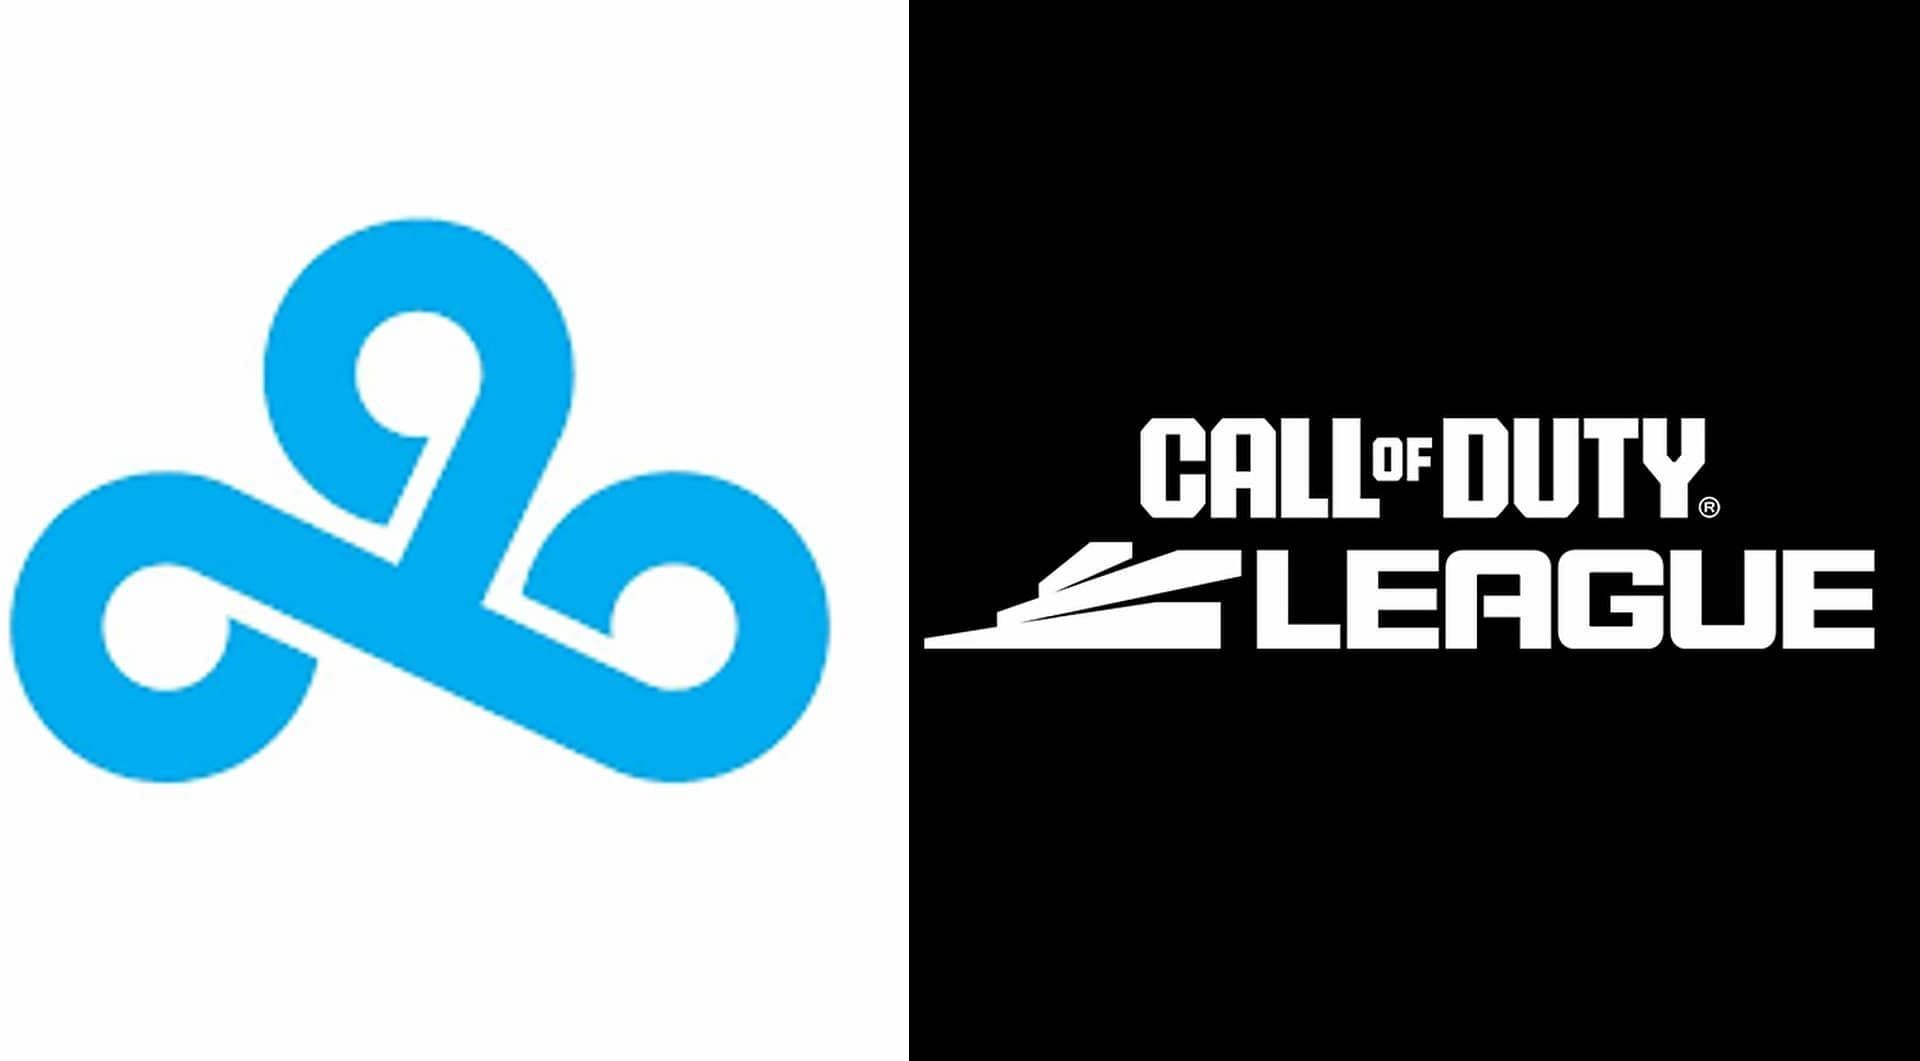 Cloud9 is reportedly acquiring New York Subliners